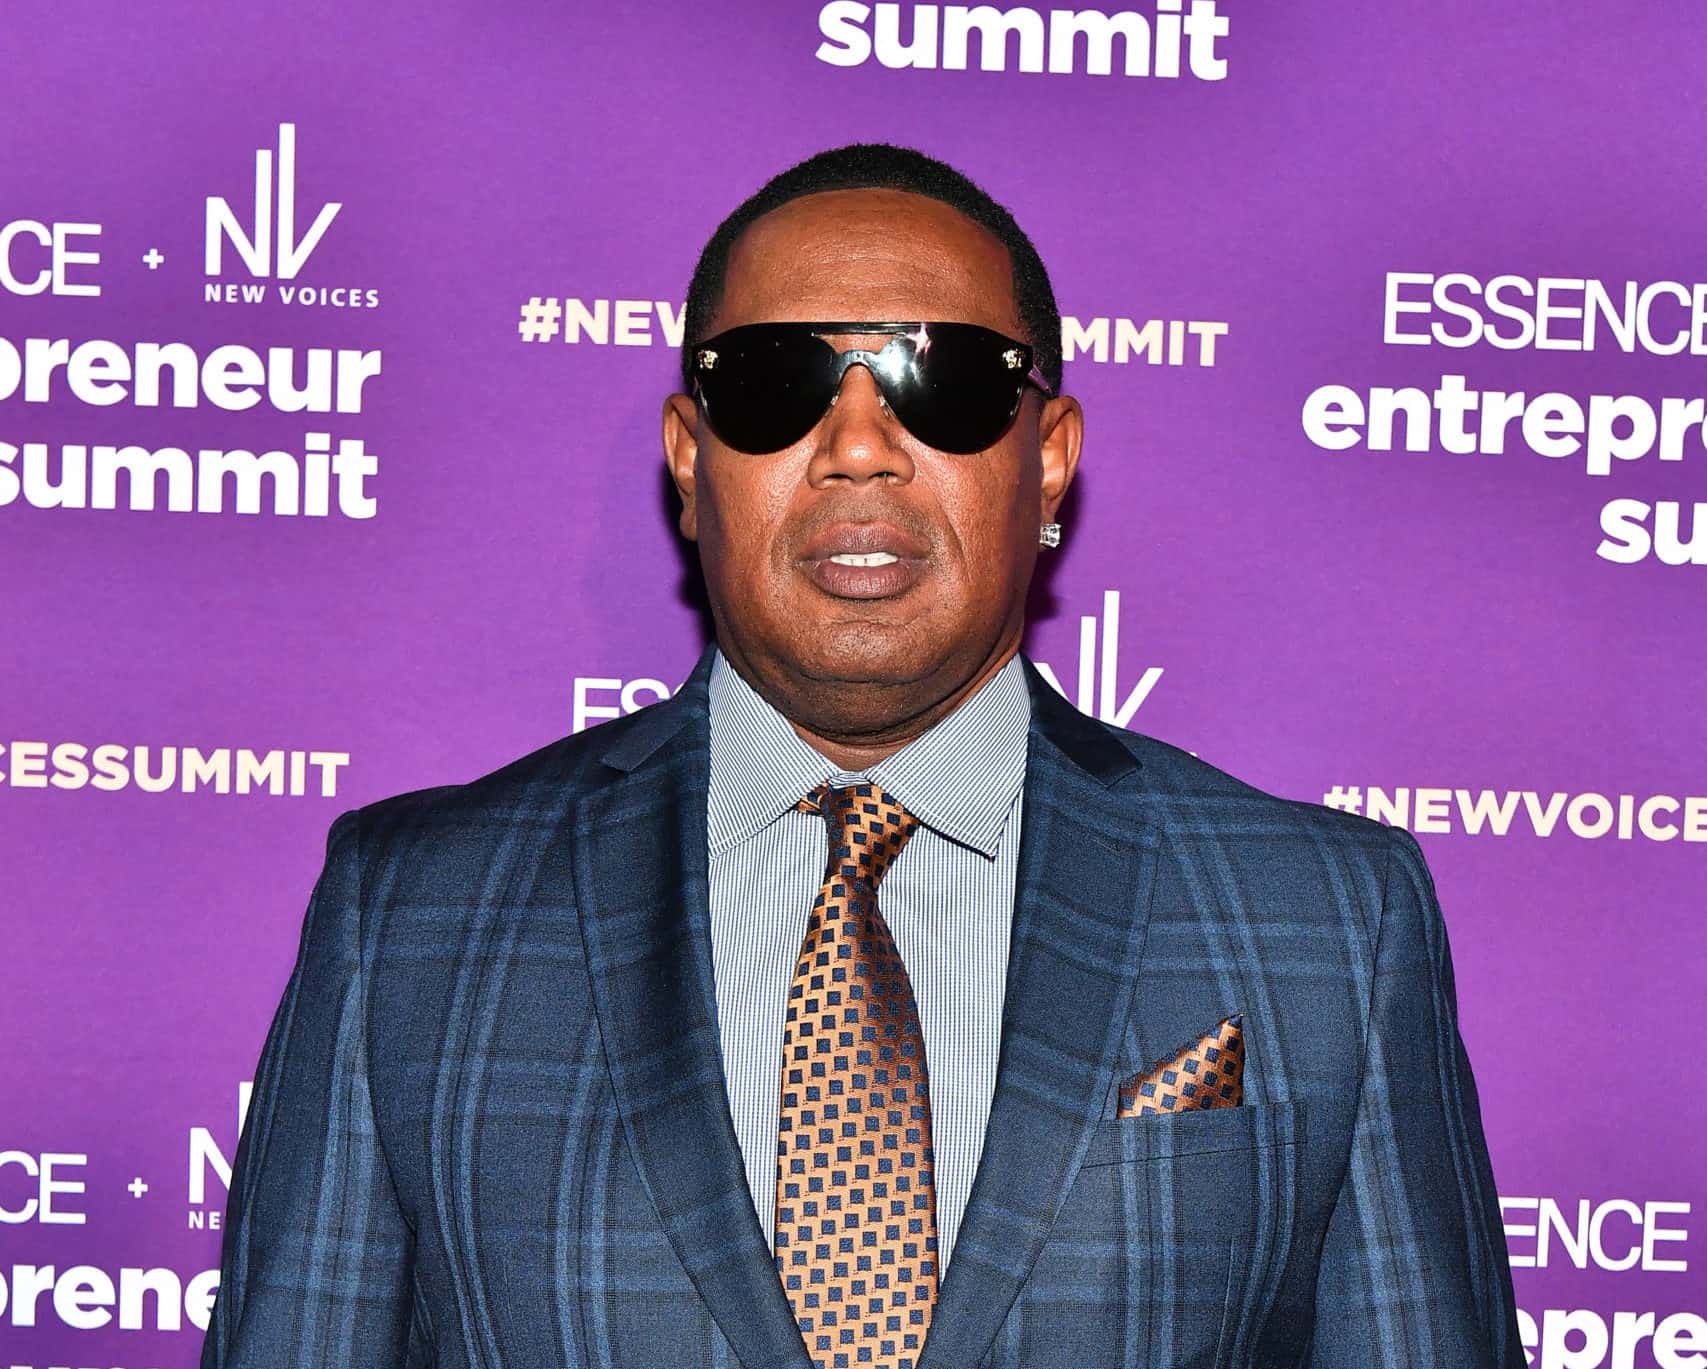 Master P tells his family he's cutting off the ATM and tells them to get jobs. This comes after a woman claiming to be a relative of his saying he isn't supportive.